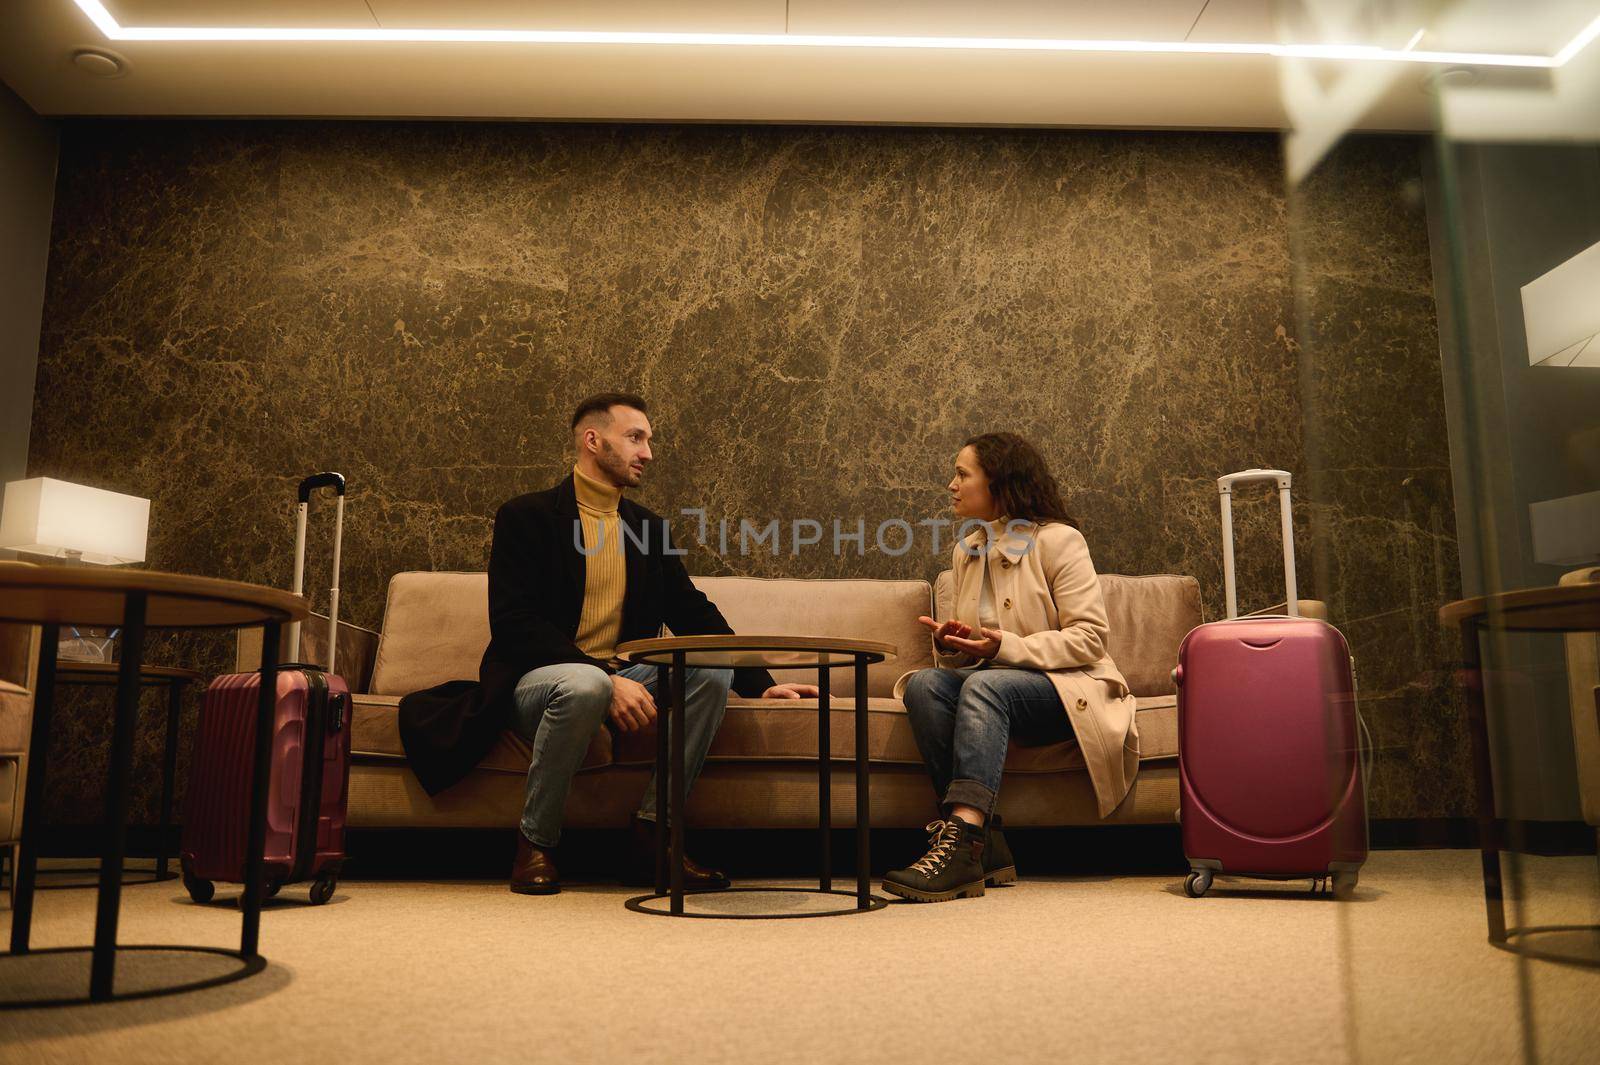 Middle-aged handsome man and pretty woman with suitcases, business partners on a business trip having a conversation in a meeting room while waiting for flight in the airport departure terminal by artgf